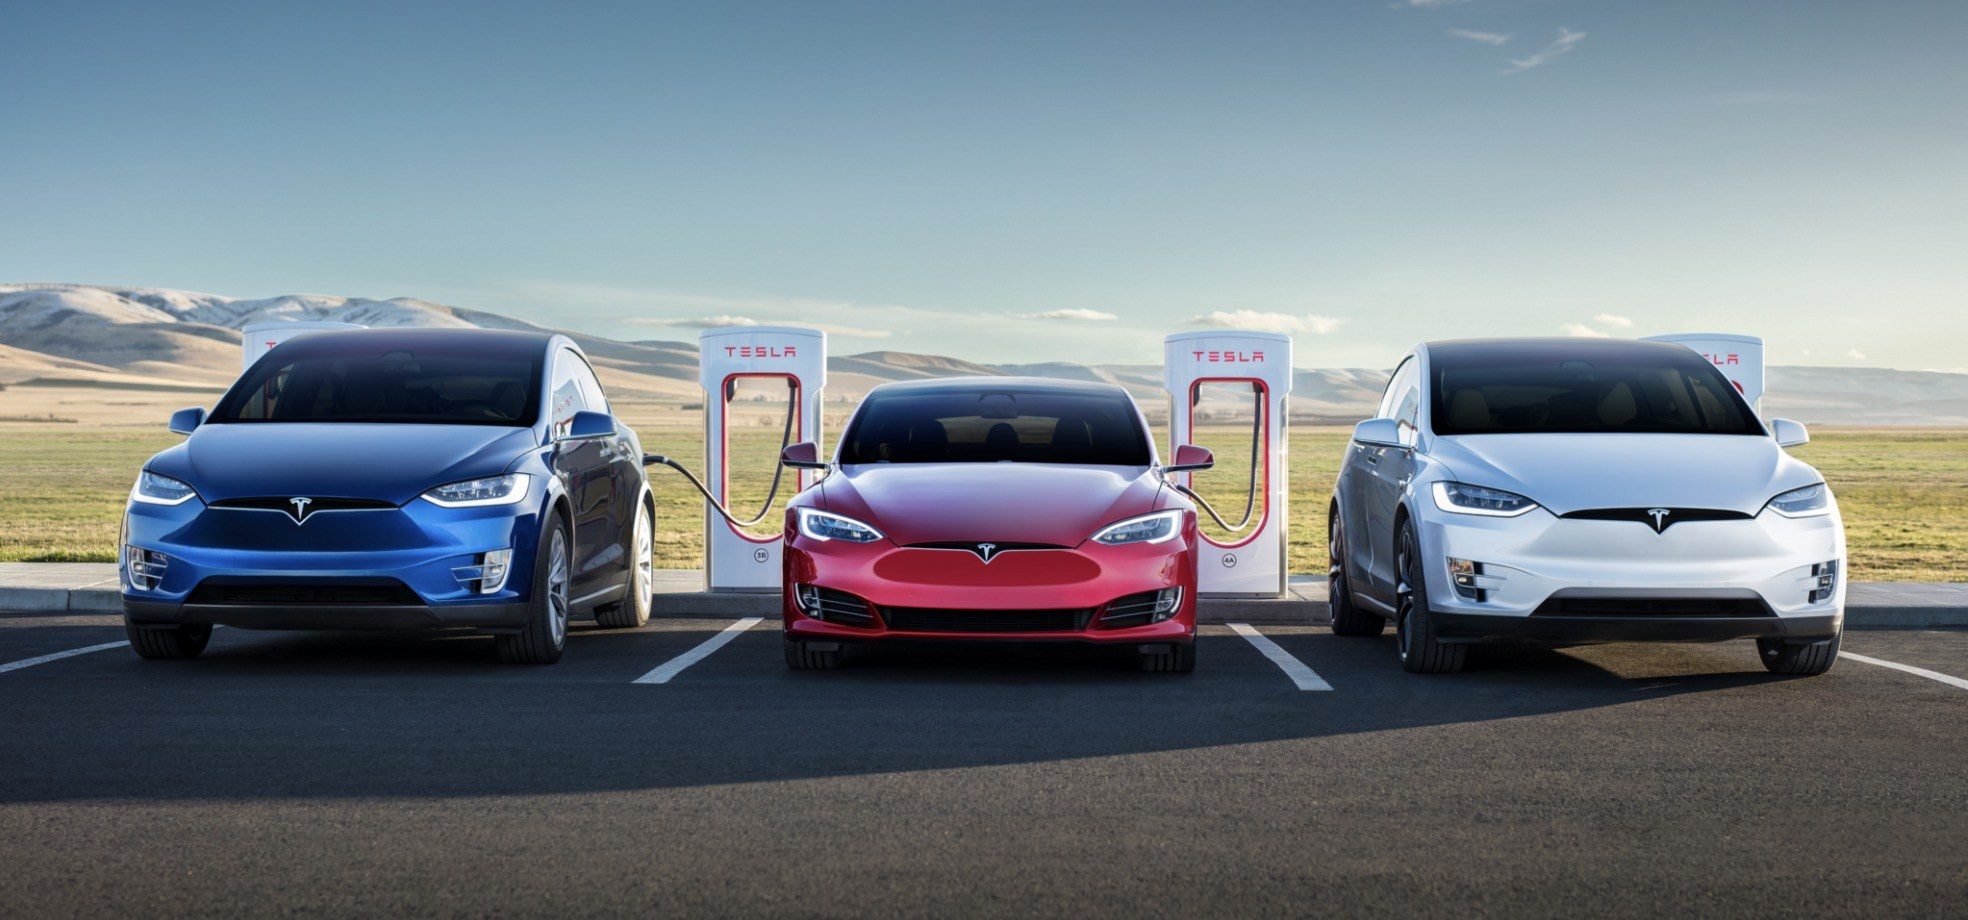 EVs like Teslas will save lives and billions in health costs in 2050: ALA report